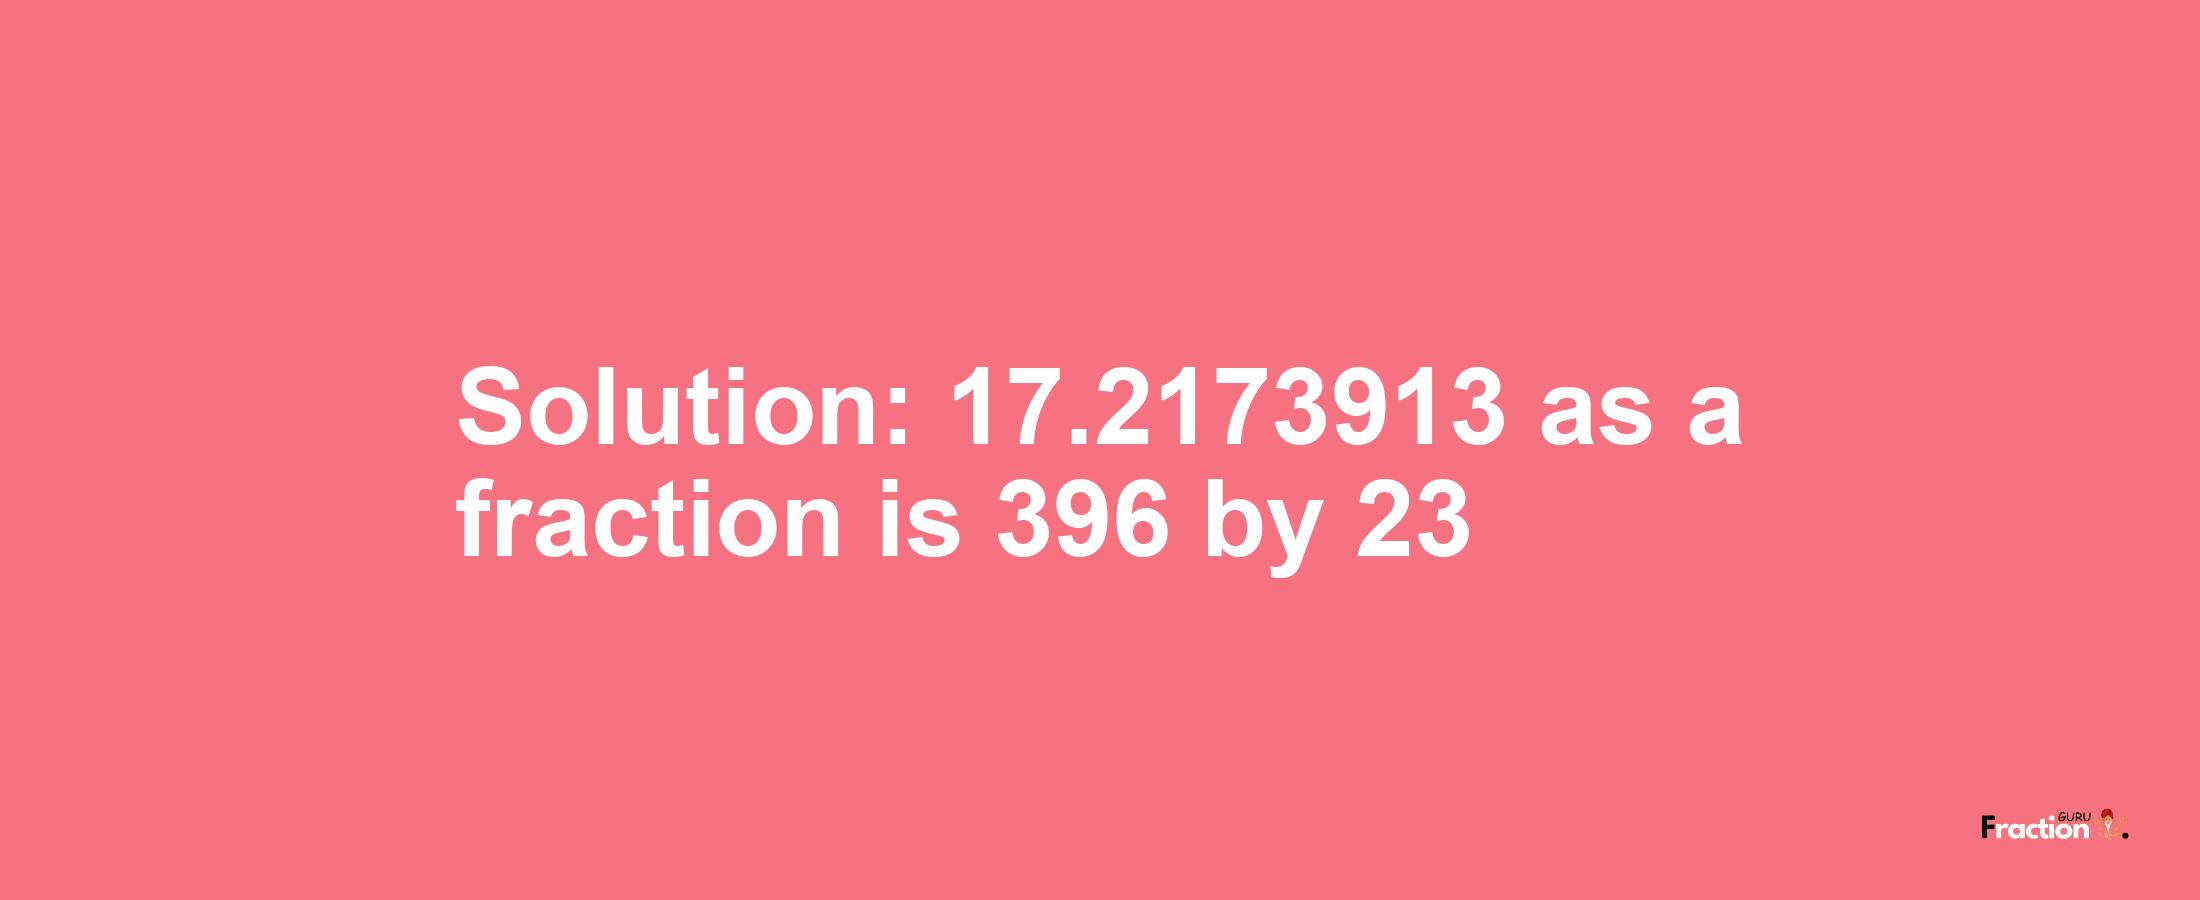 Solution:17.2173913 as a fraction is 396/23